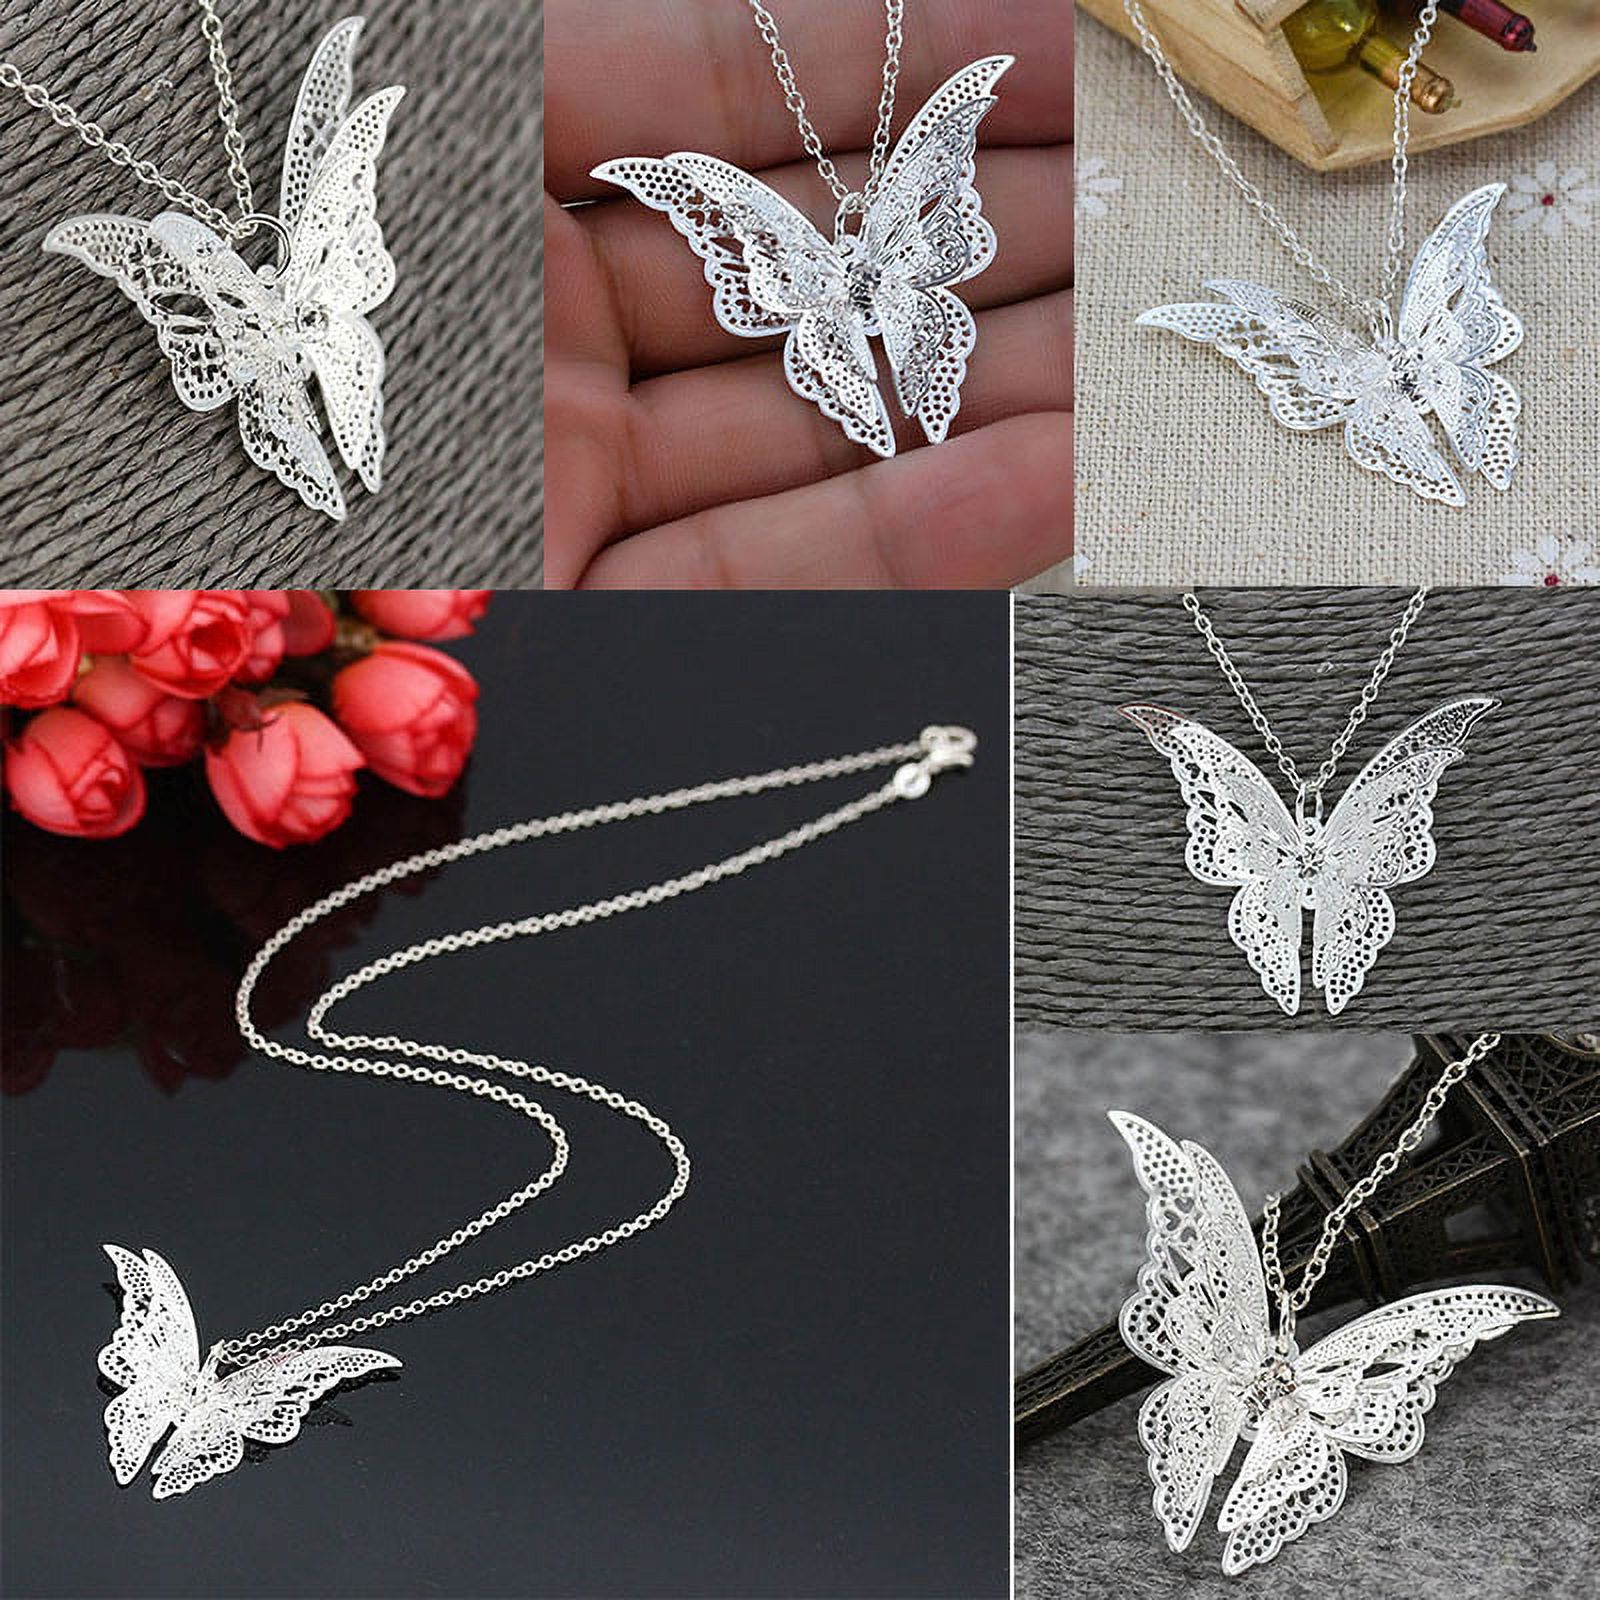 Deals of the Day,Jovati Women Pendant Lovely Silver Butterfly Pendant Chain Necklace Alloy Jewelry Gift on Clearance - image 2 of 4